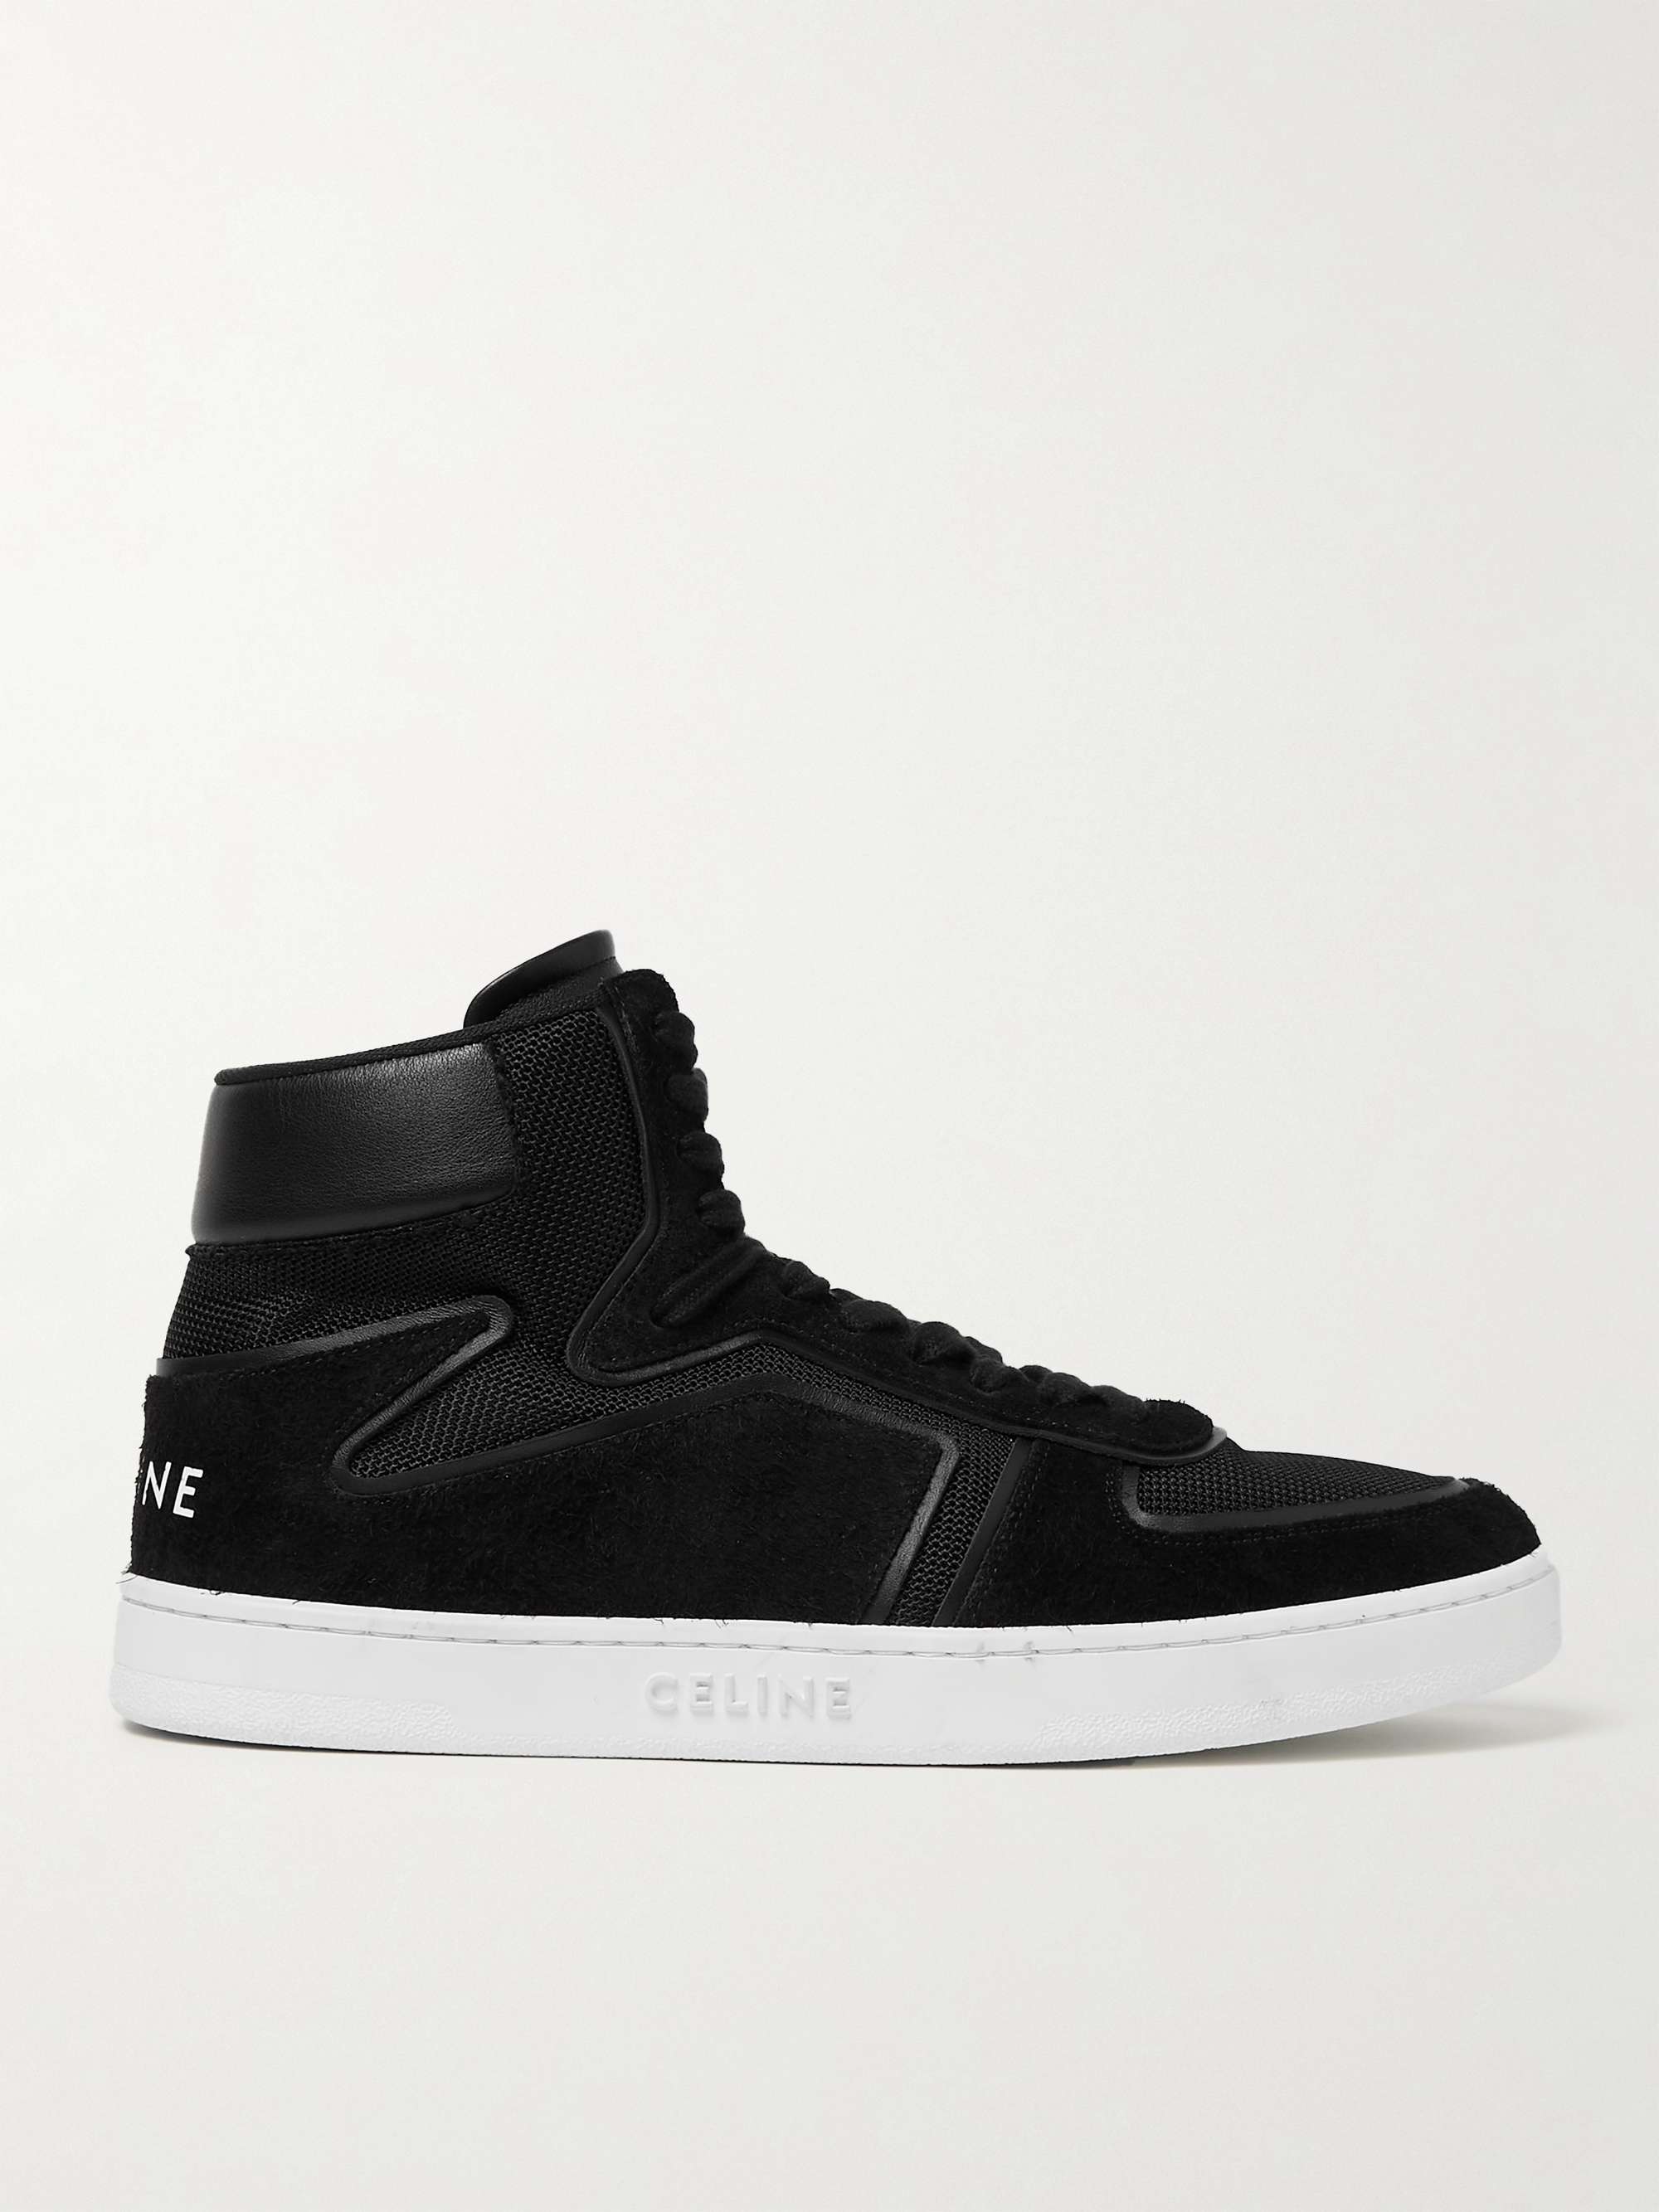 CELINE HOMME Z CT-01 Mesh and Suede High-Top Sneakers for Men | MR PORTER